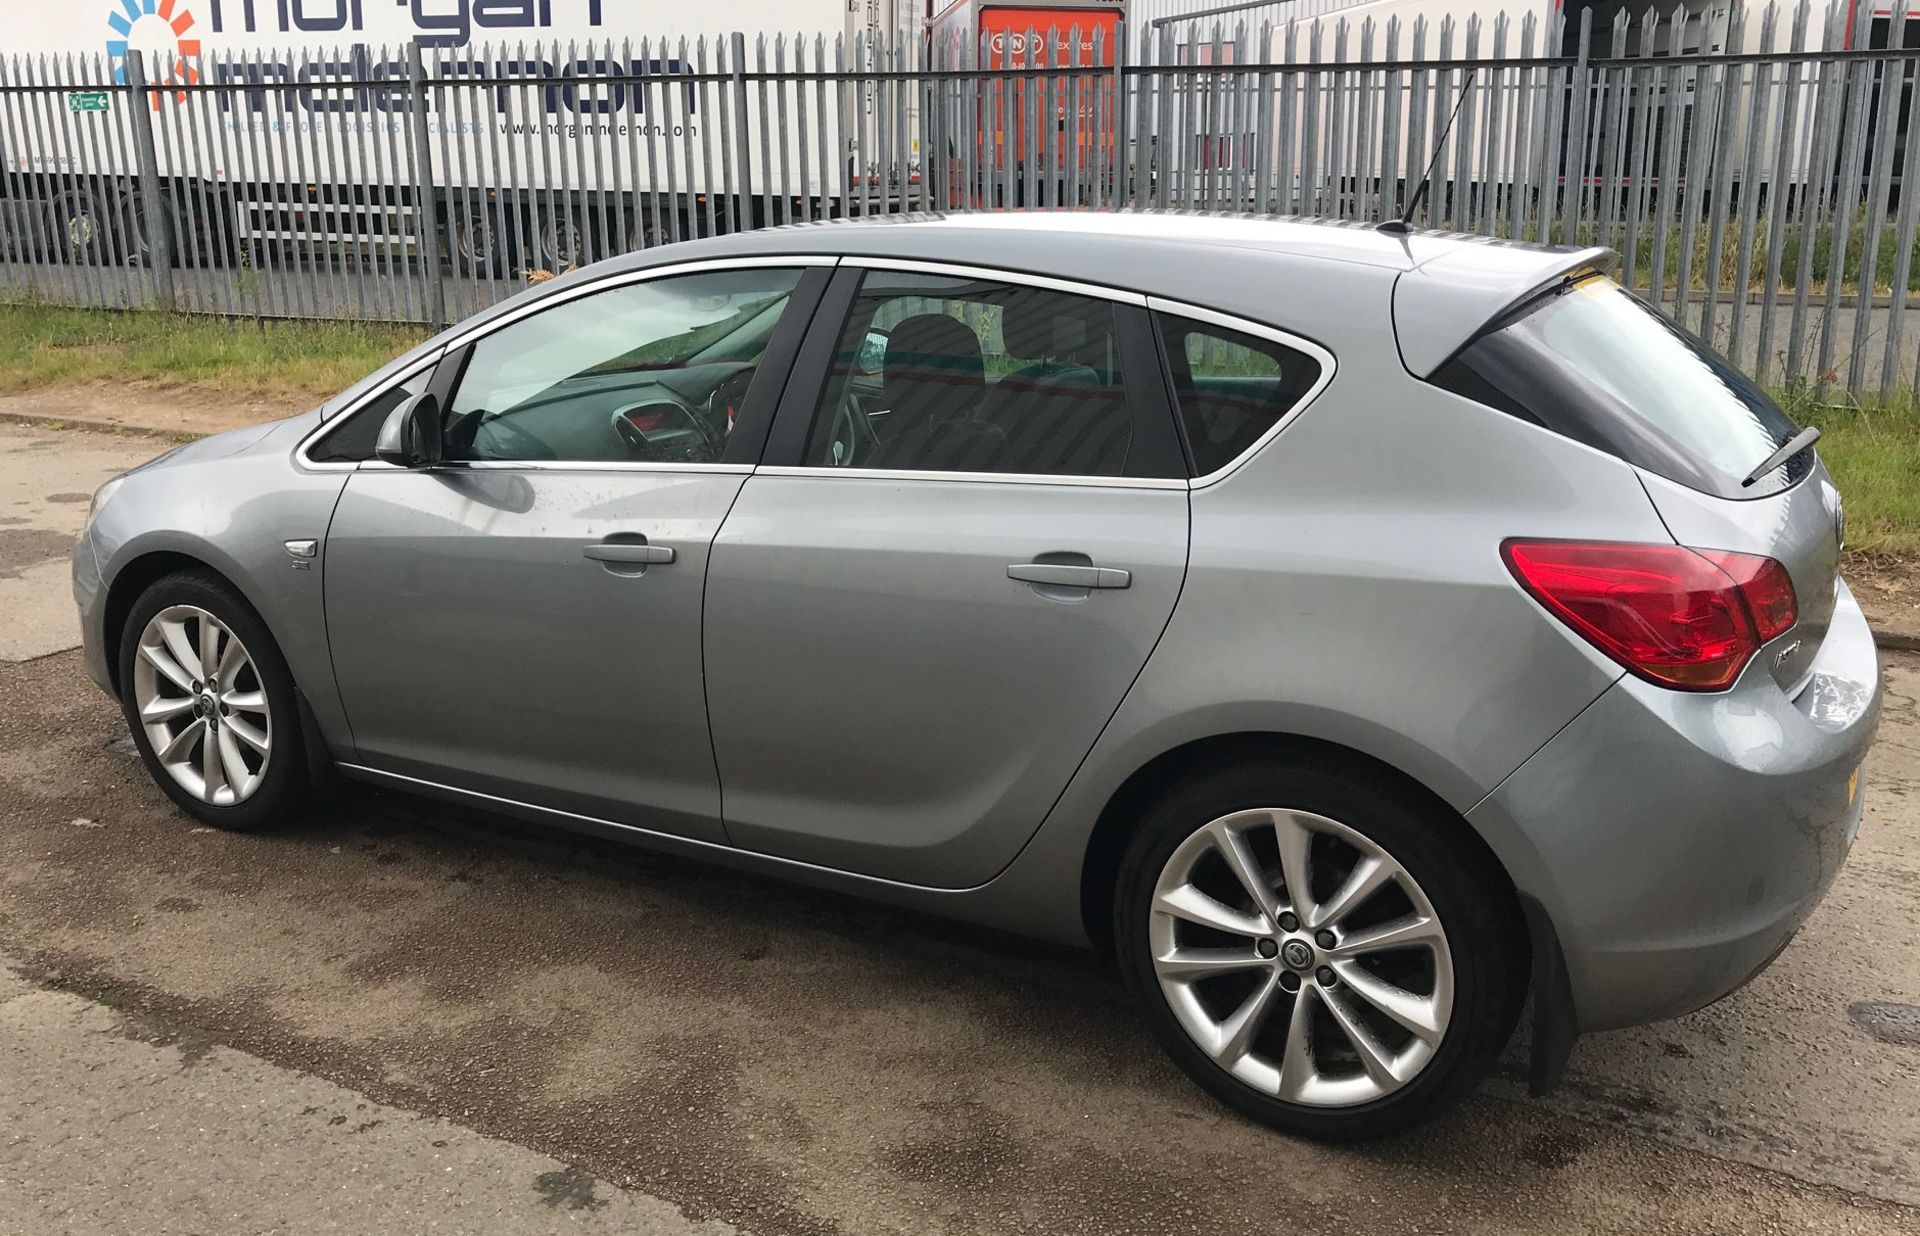 2010 Vauxhall Astra 1.6 SE 5Dr Hatchback - CL505 - NO VAT ON THE HAMMER - Location: Corby, - Image 7 of 11